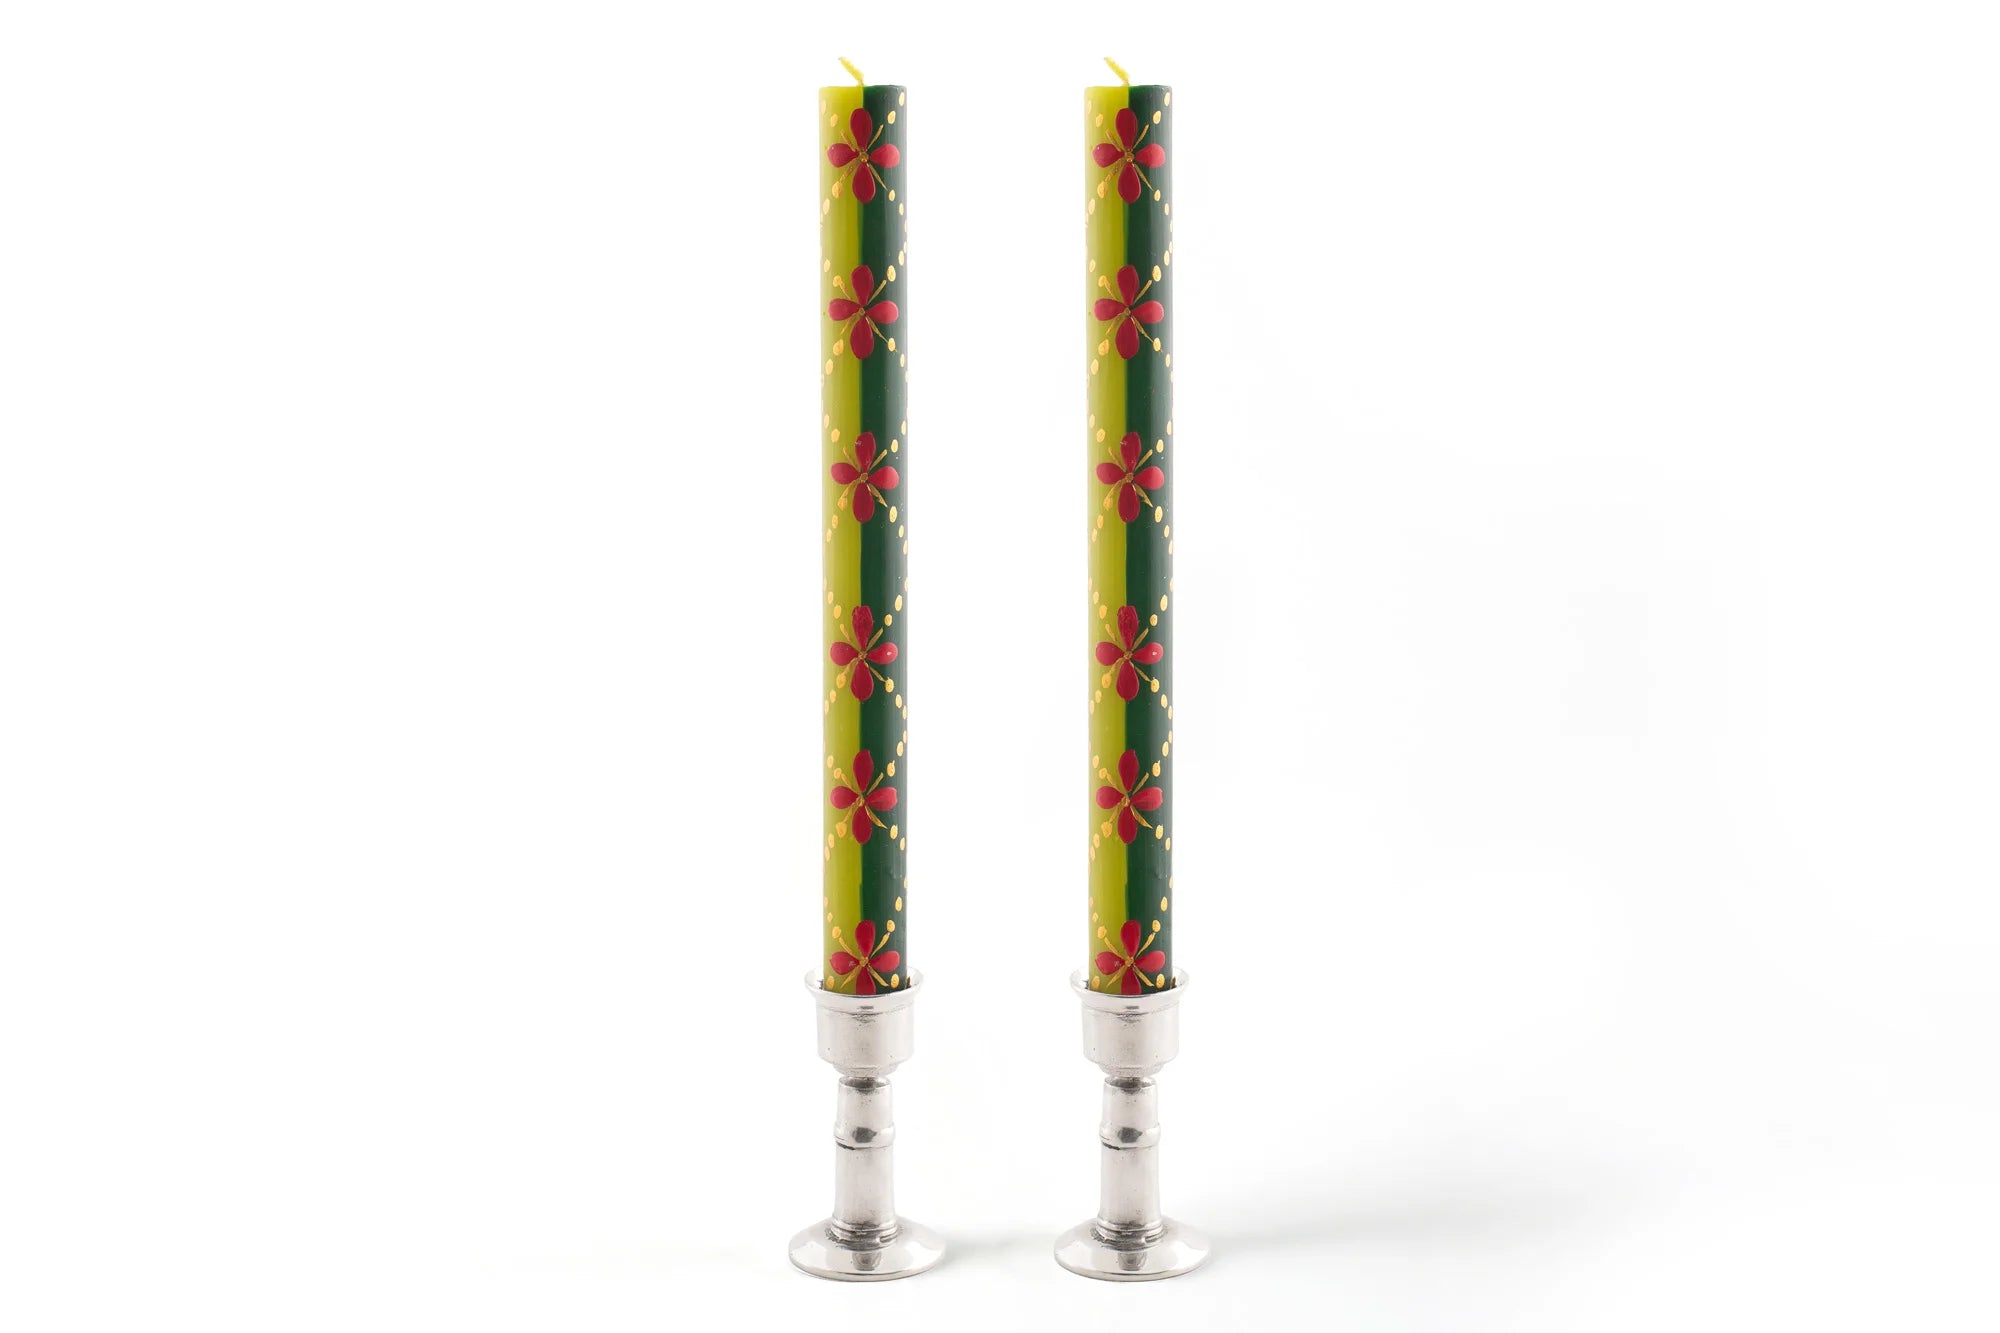 Matched pair of Christmas dinner tapers in pewter taper holders. Hand painted in various traditional Christmas patterns in red, dark green, light green and gold